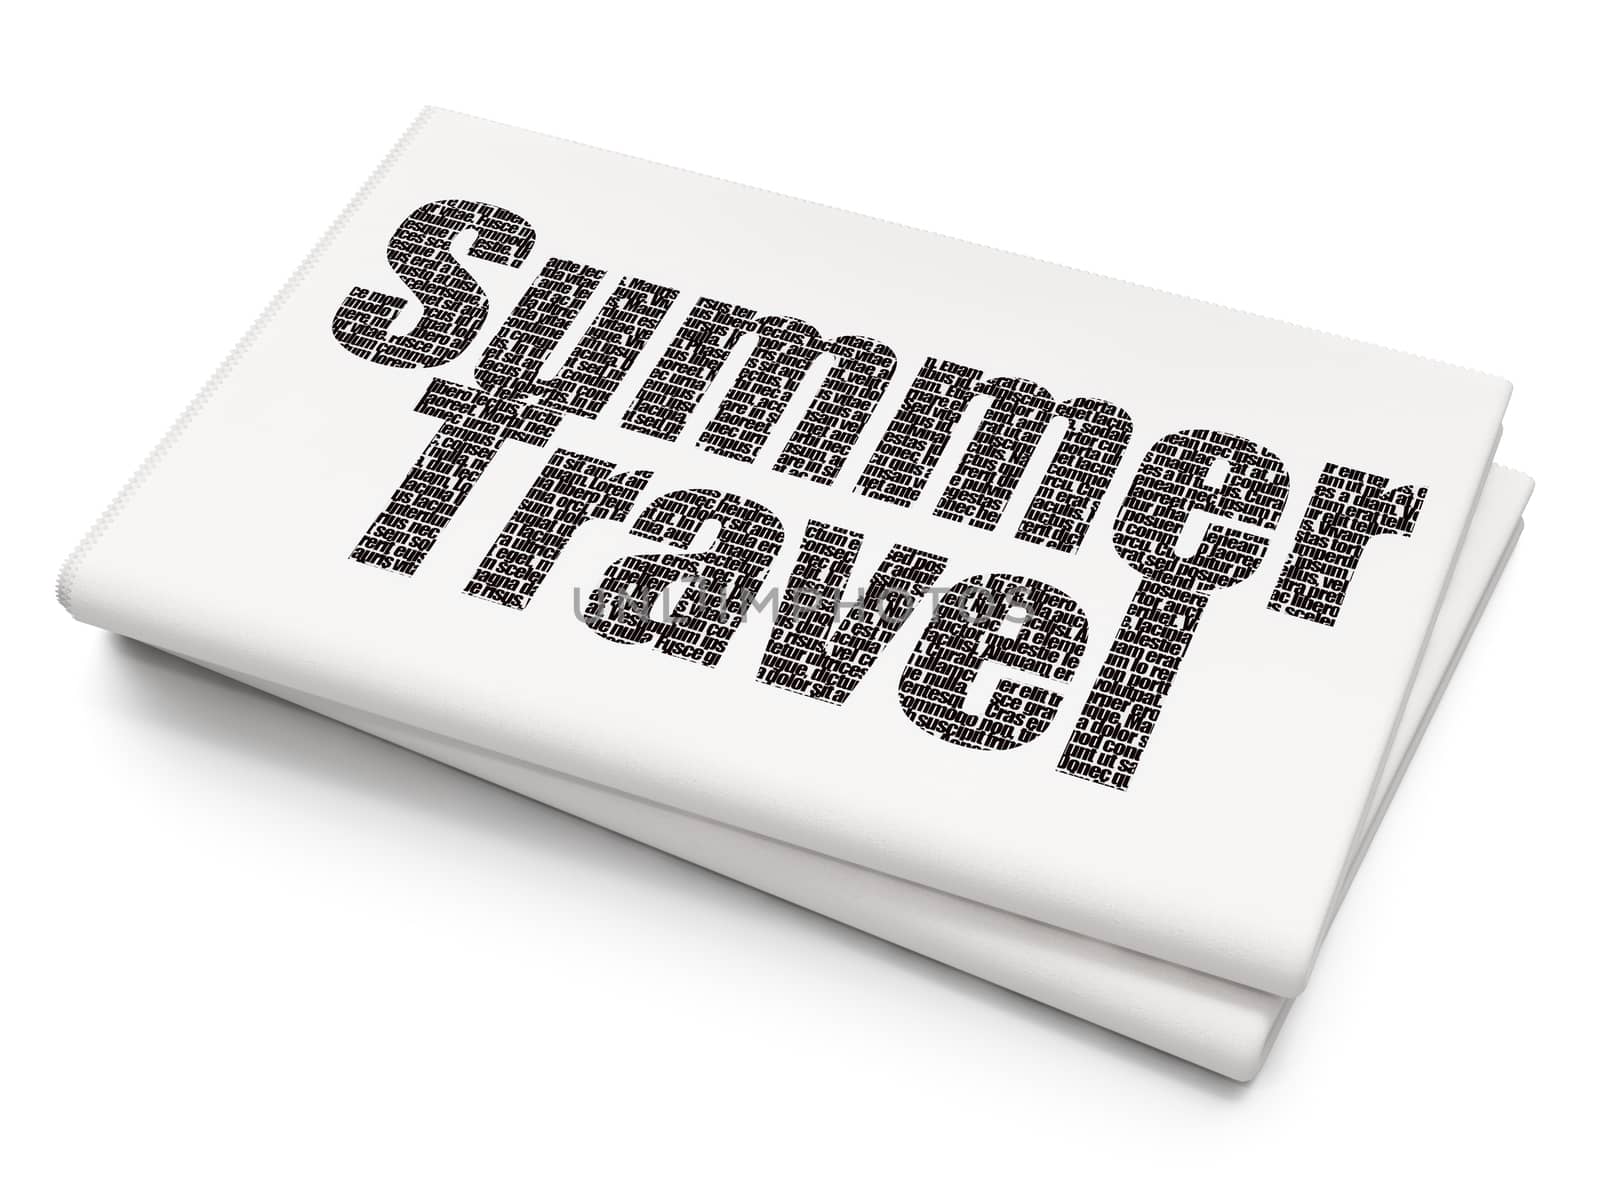 Vacation concept: Pixelated black text Summer Travel on Blank Newspaper background